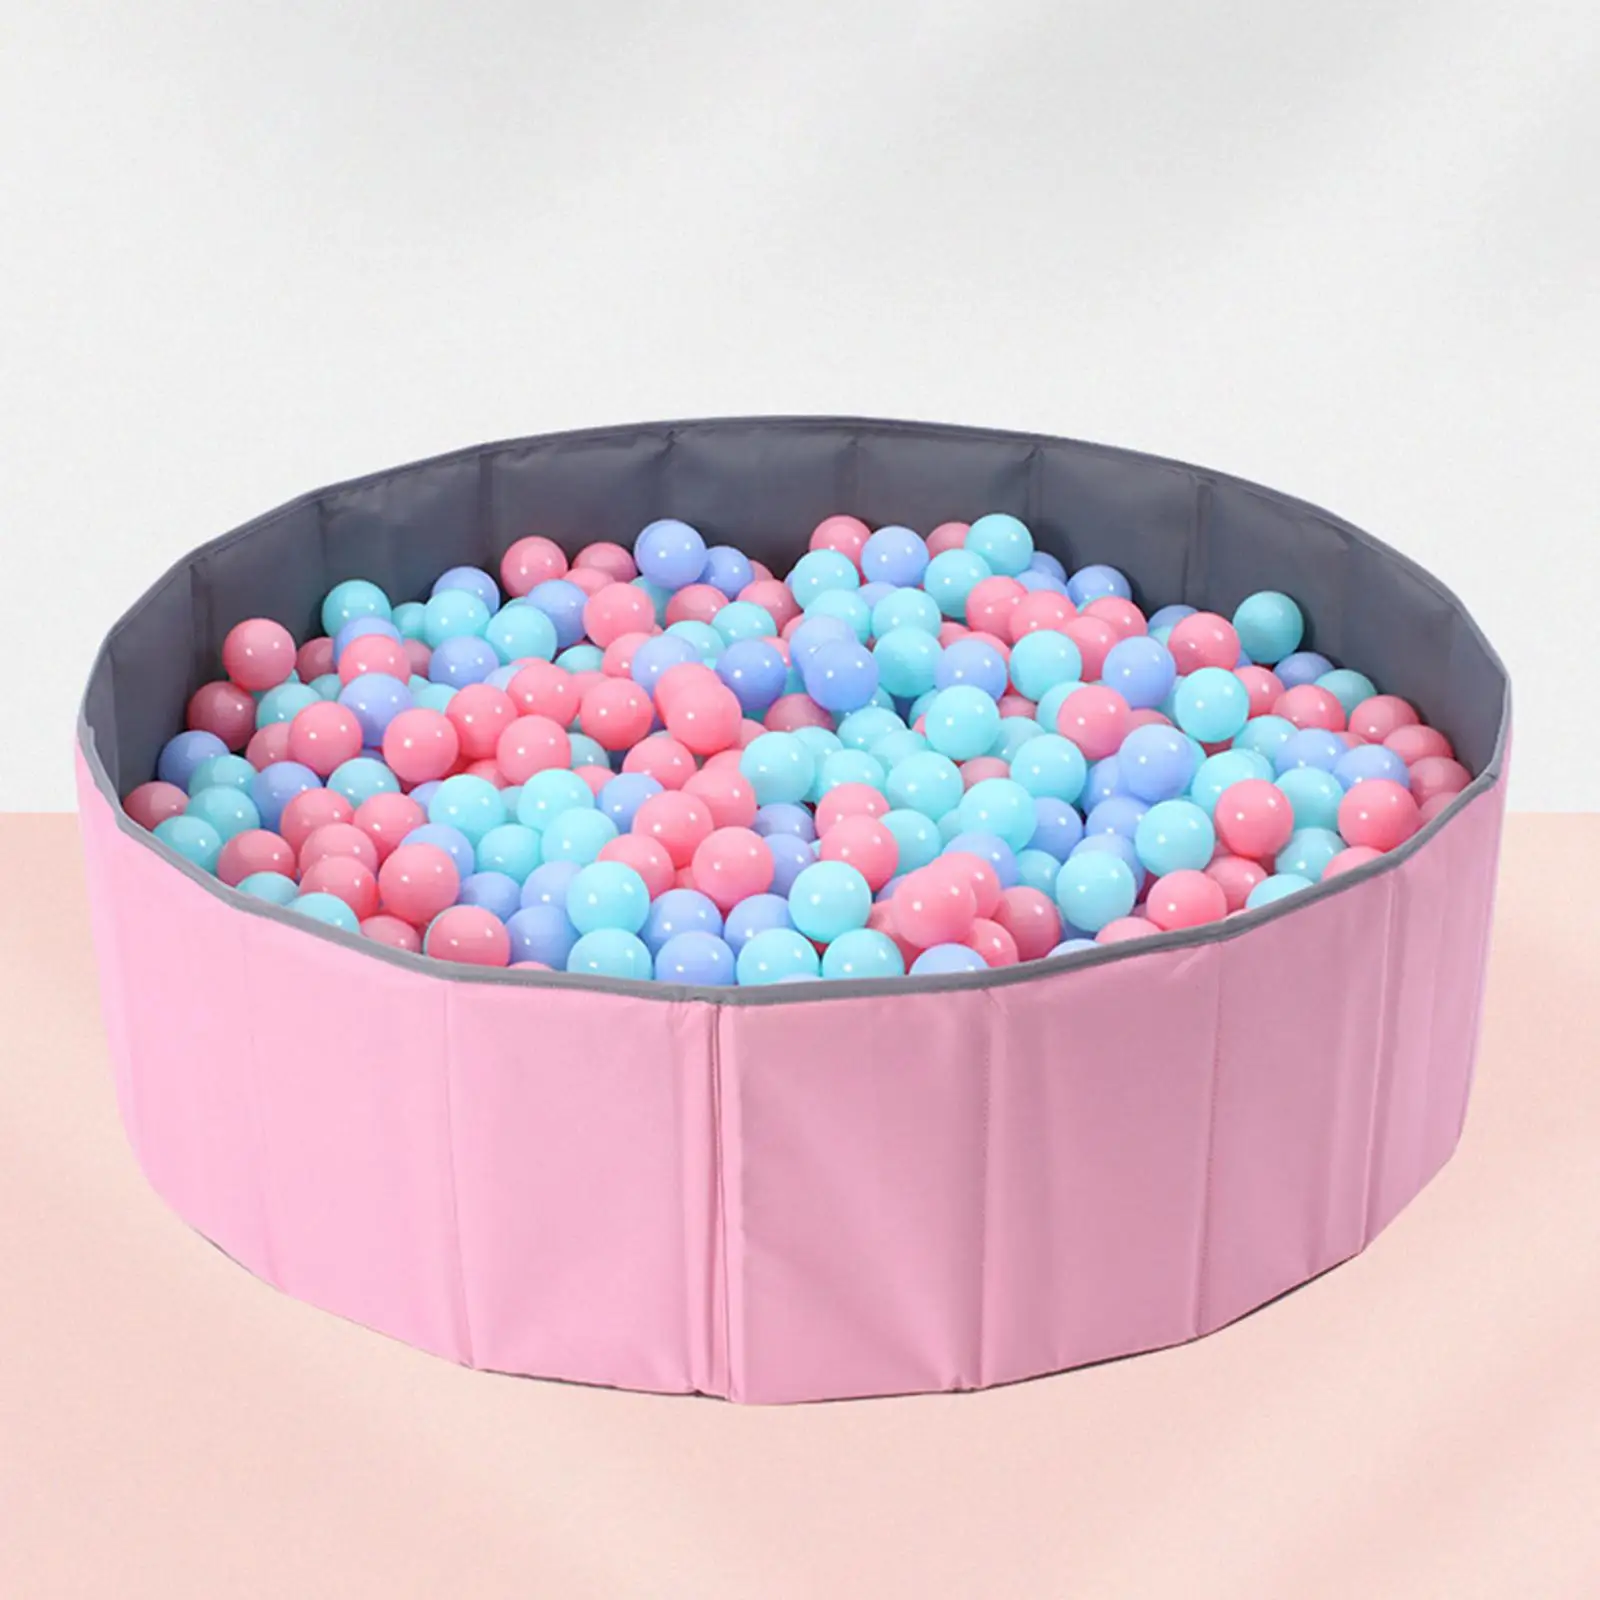 Playpen Ball Pits Portable Park Indoor Outdoor Playground Balls Pool